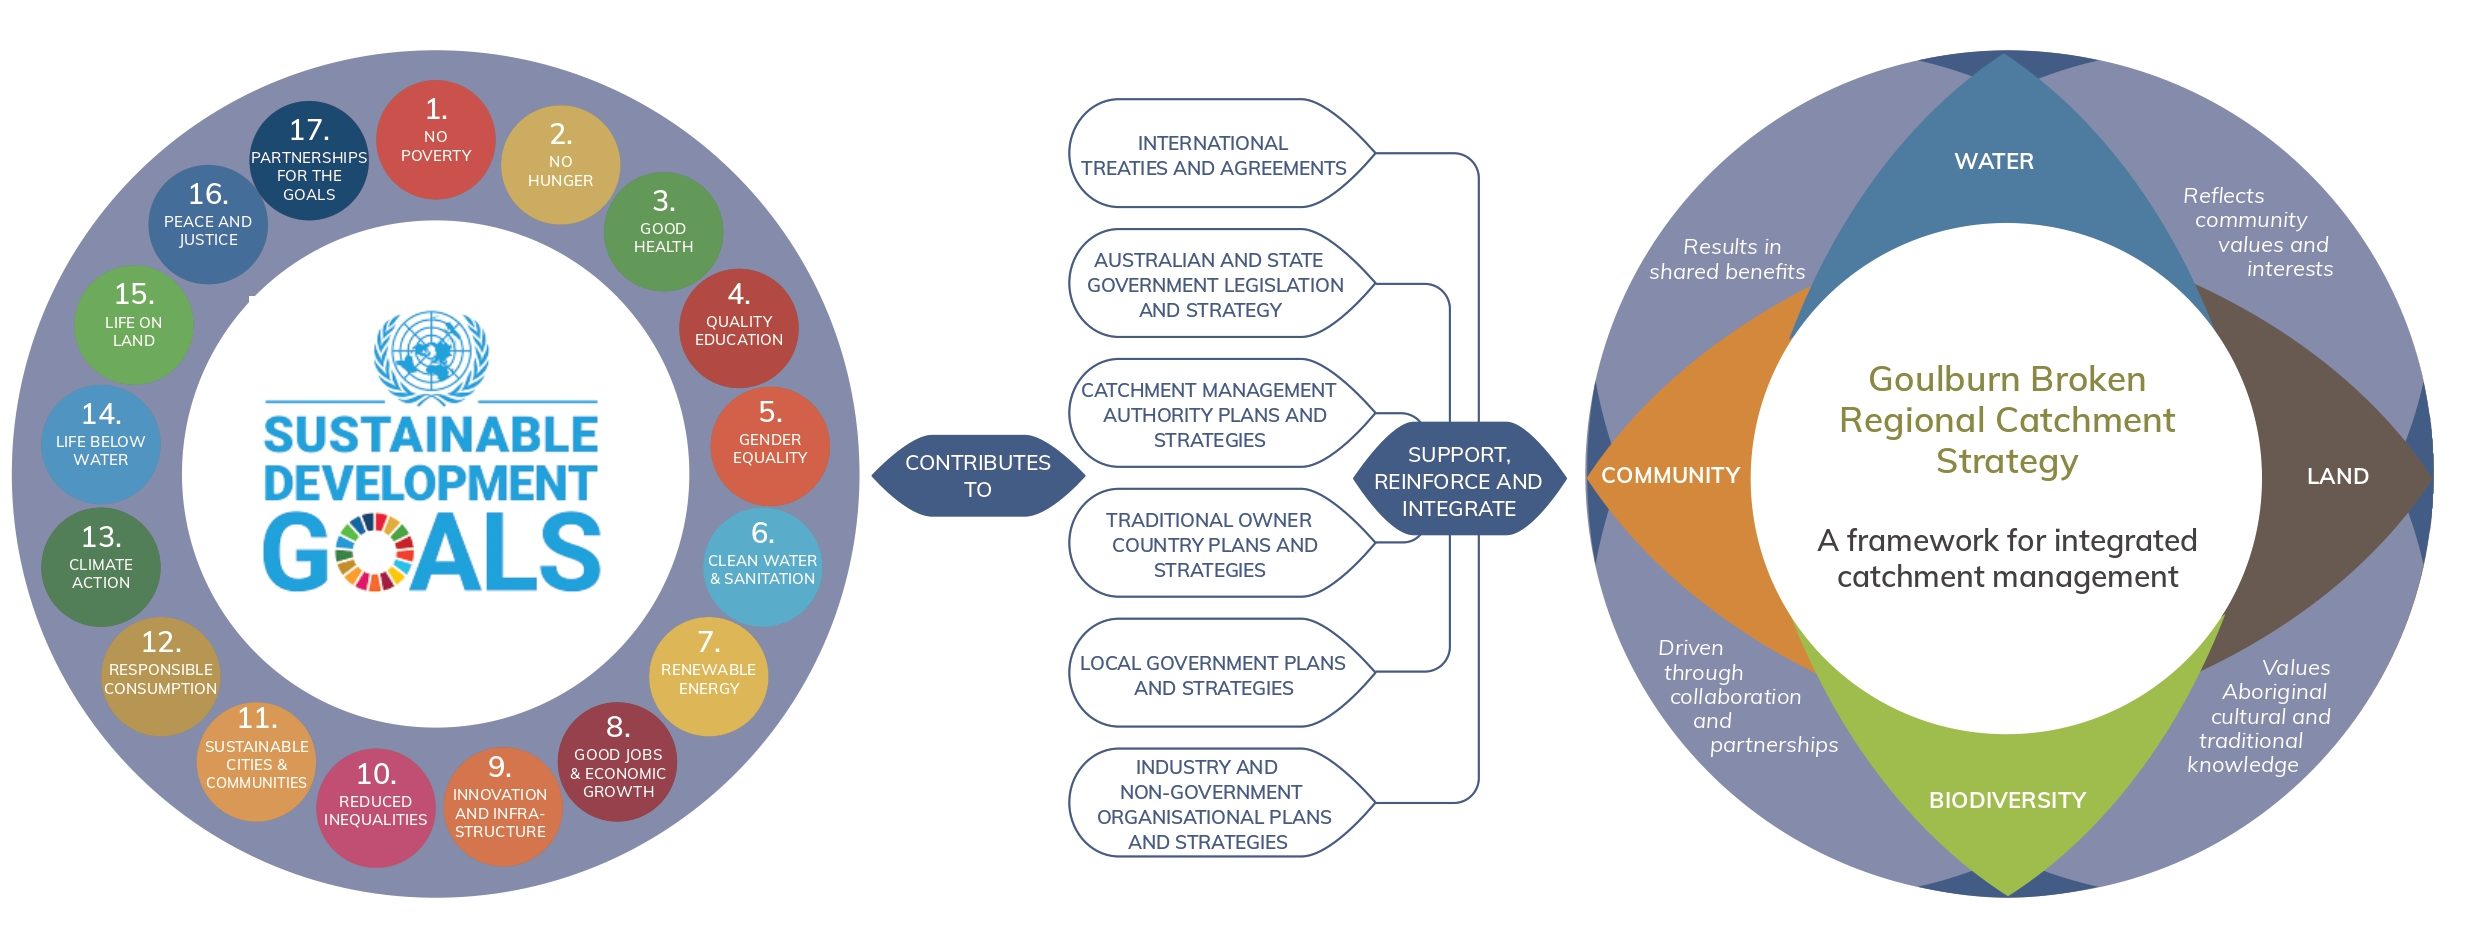 A diagram showing how the 17 United Nations Sustainable Development Goals contributes to legal frameworks, strategies and plans at a range of scales (from local to national), which in turn support, reinforce and integrate with the Goulburn Broken Regional Catchment Strategy.